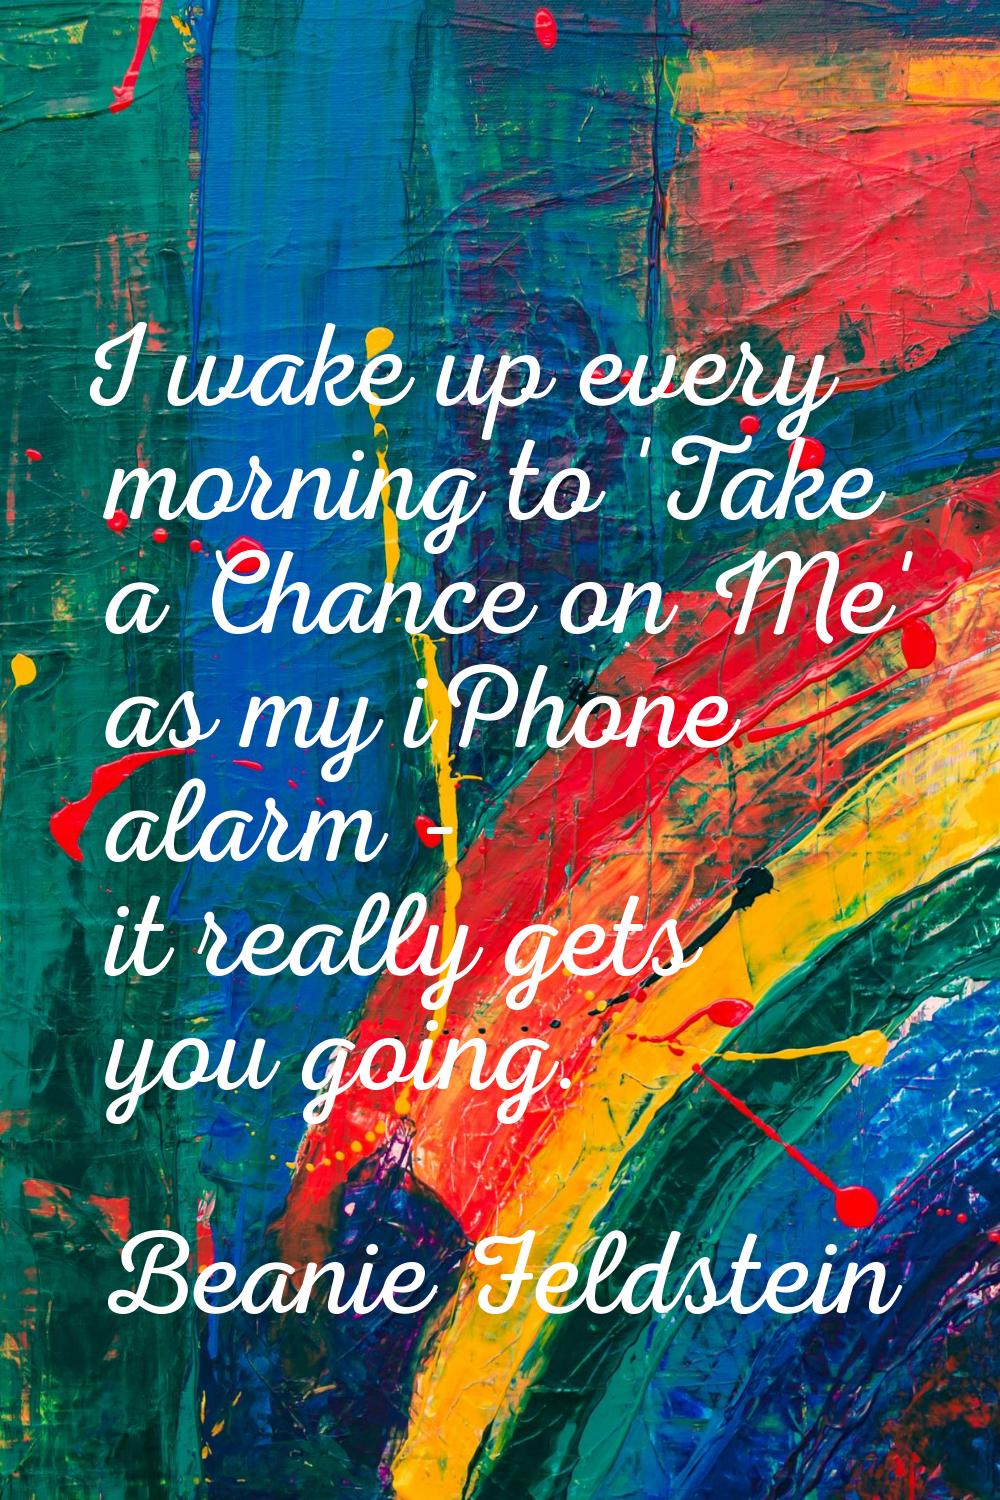 I wake up every morning to 'Take a Chance on Me' as my iPhone alarm - it really gets you going.